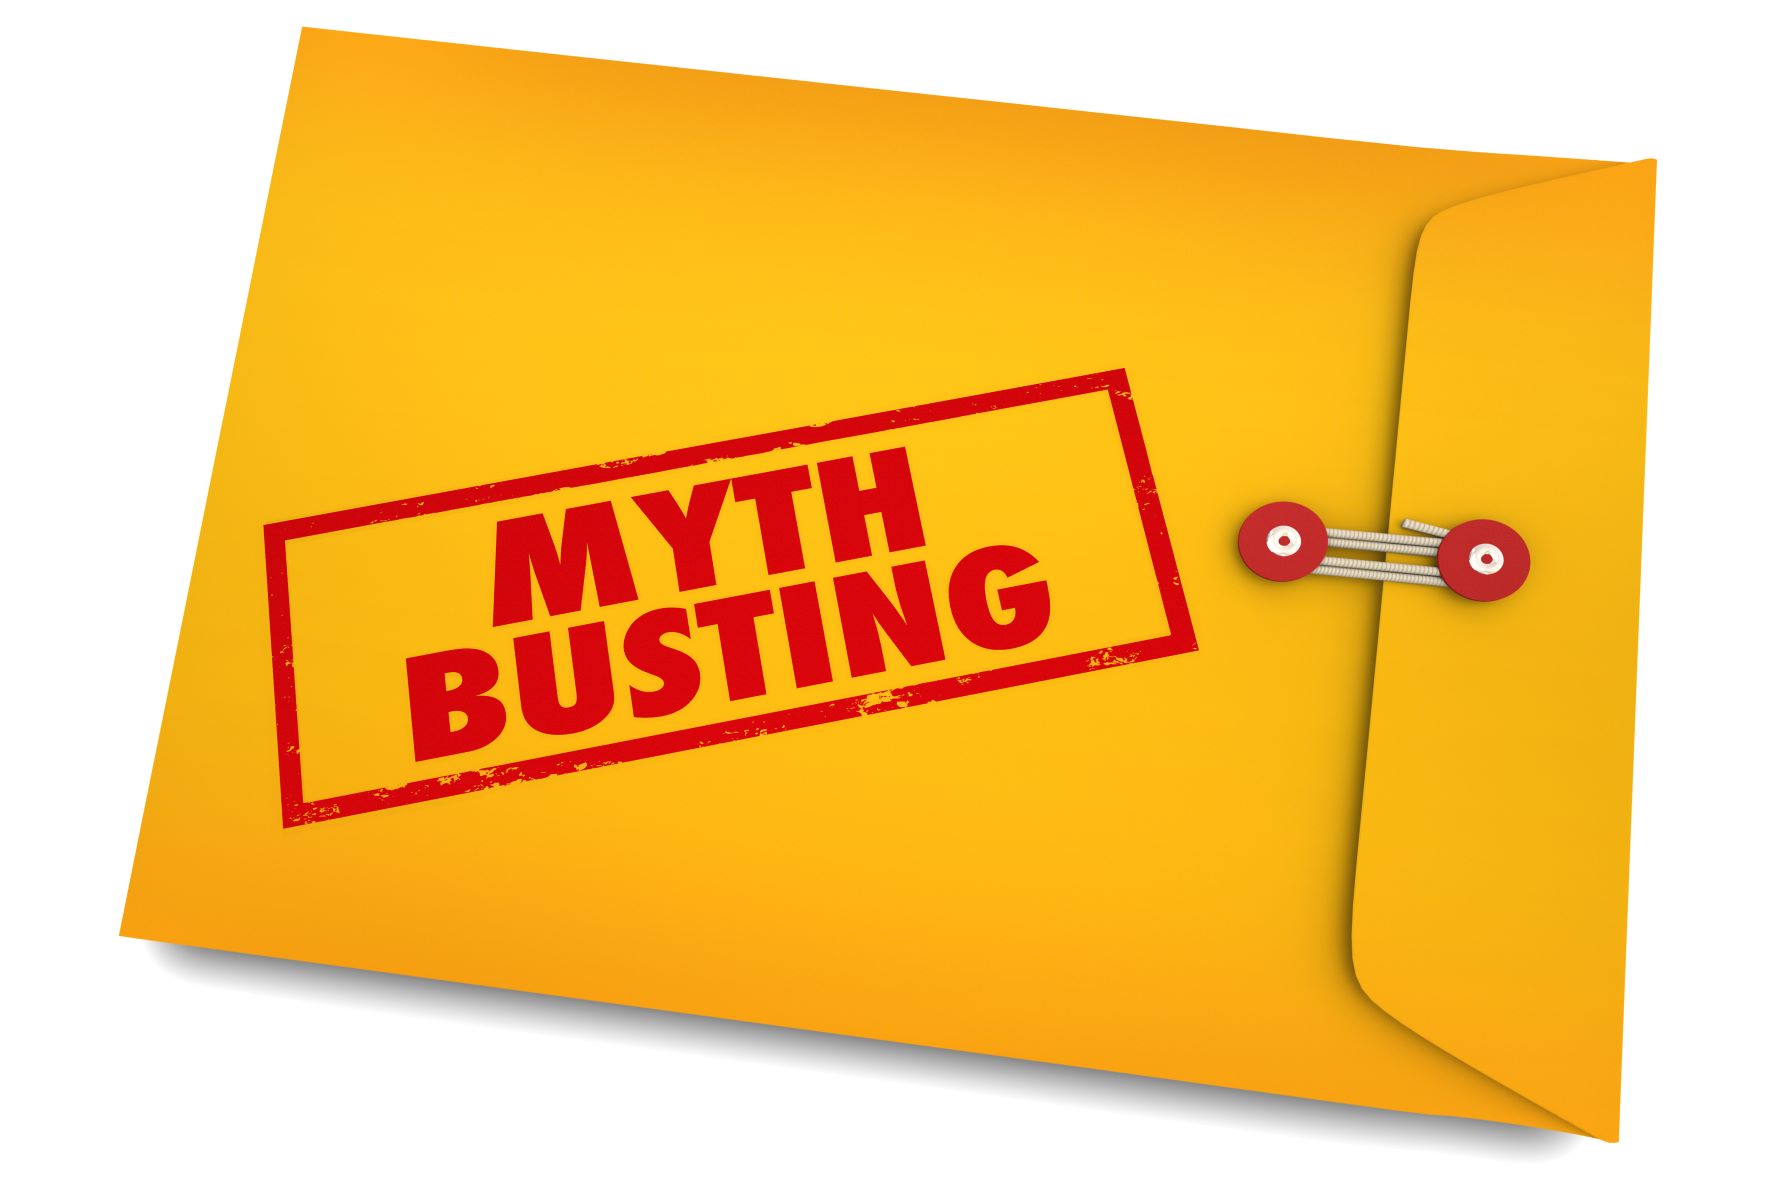 5 Out-Of-Network Myths Debunked